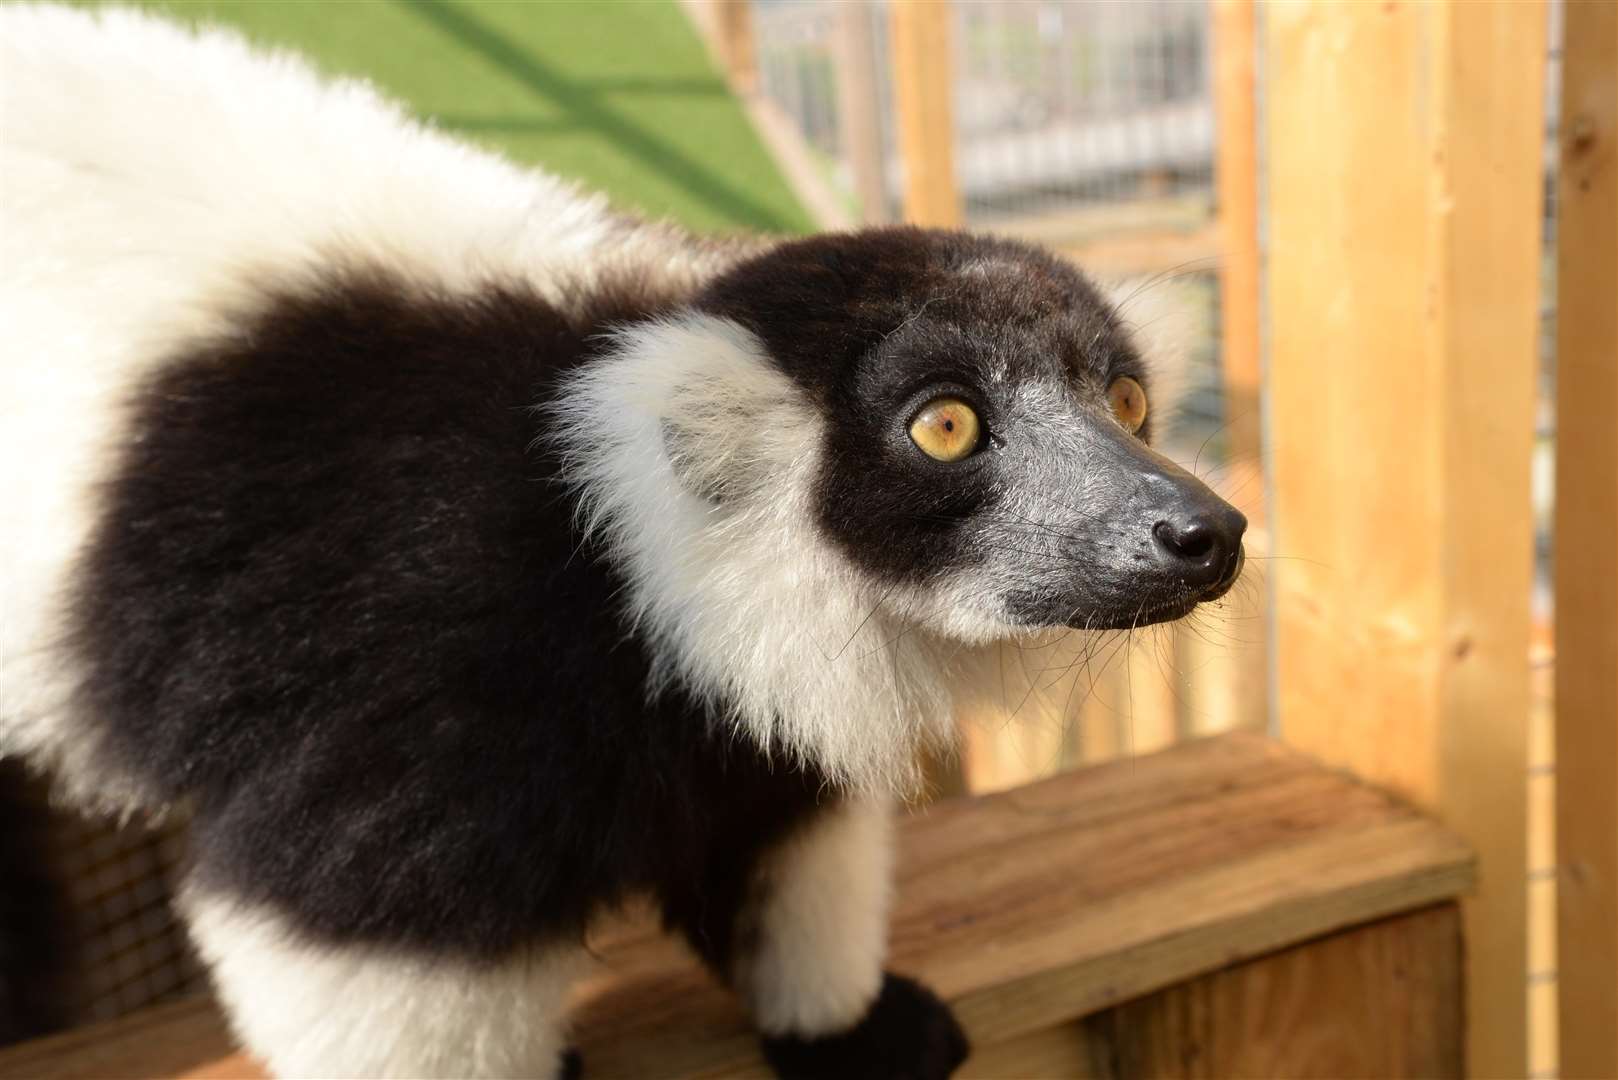 One of Lemurs in their enclosure at the Fenn Bell Inn, St Mary Hoo. Picture: Chris Davey. (3281524)